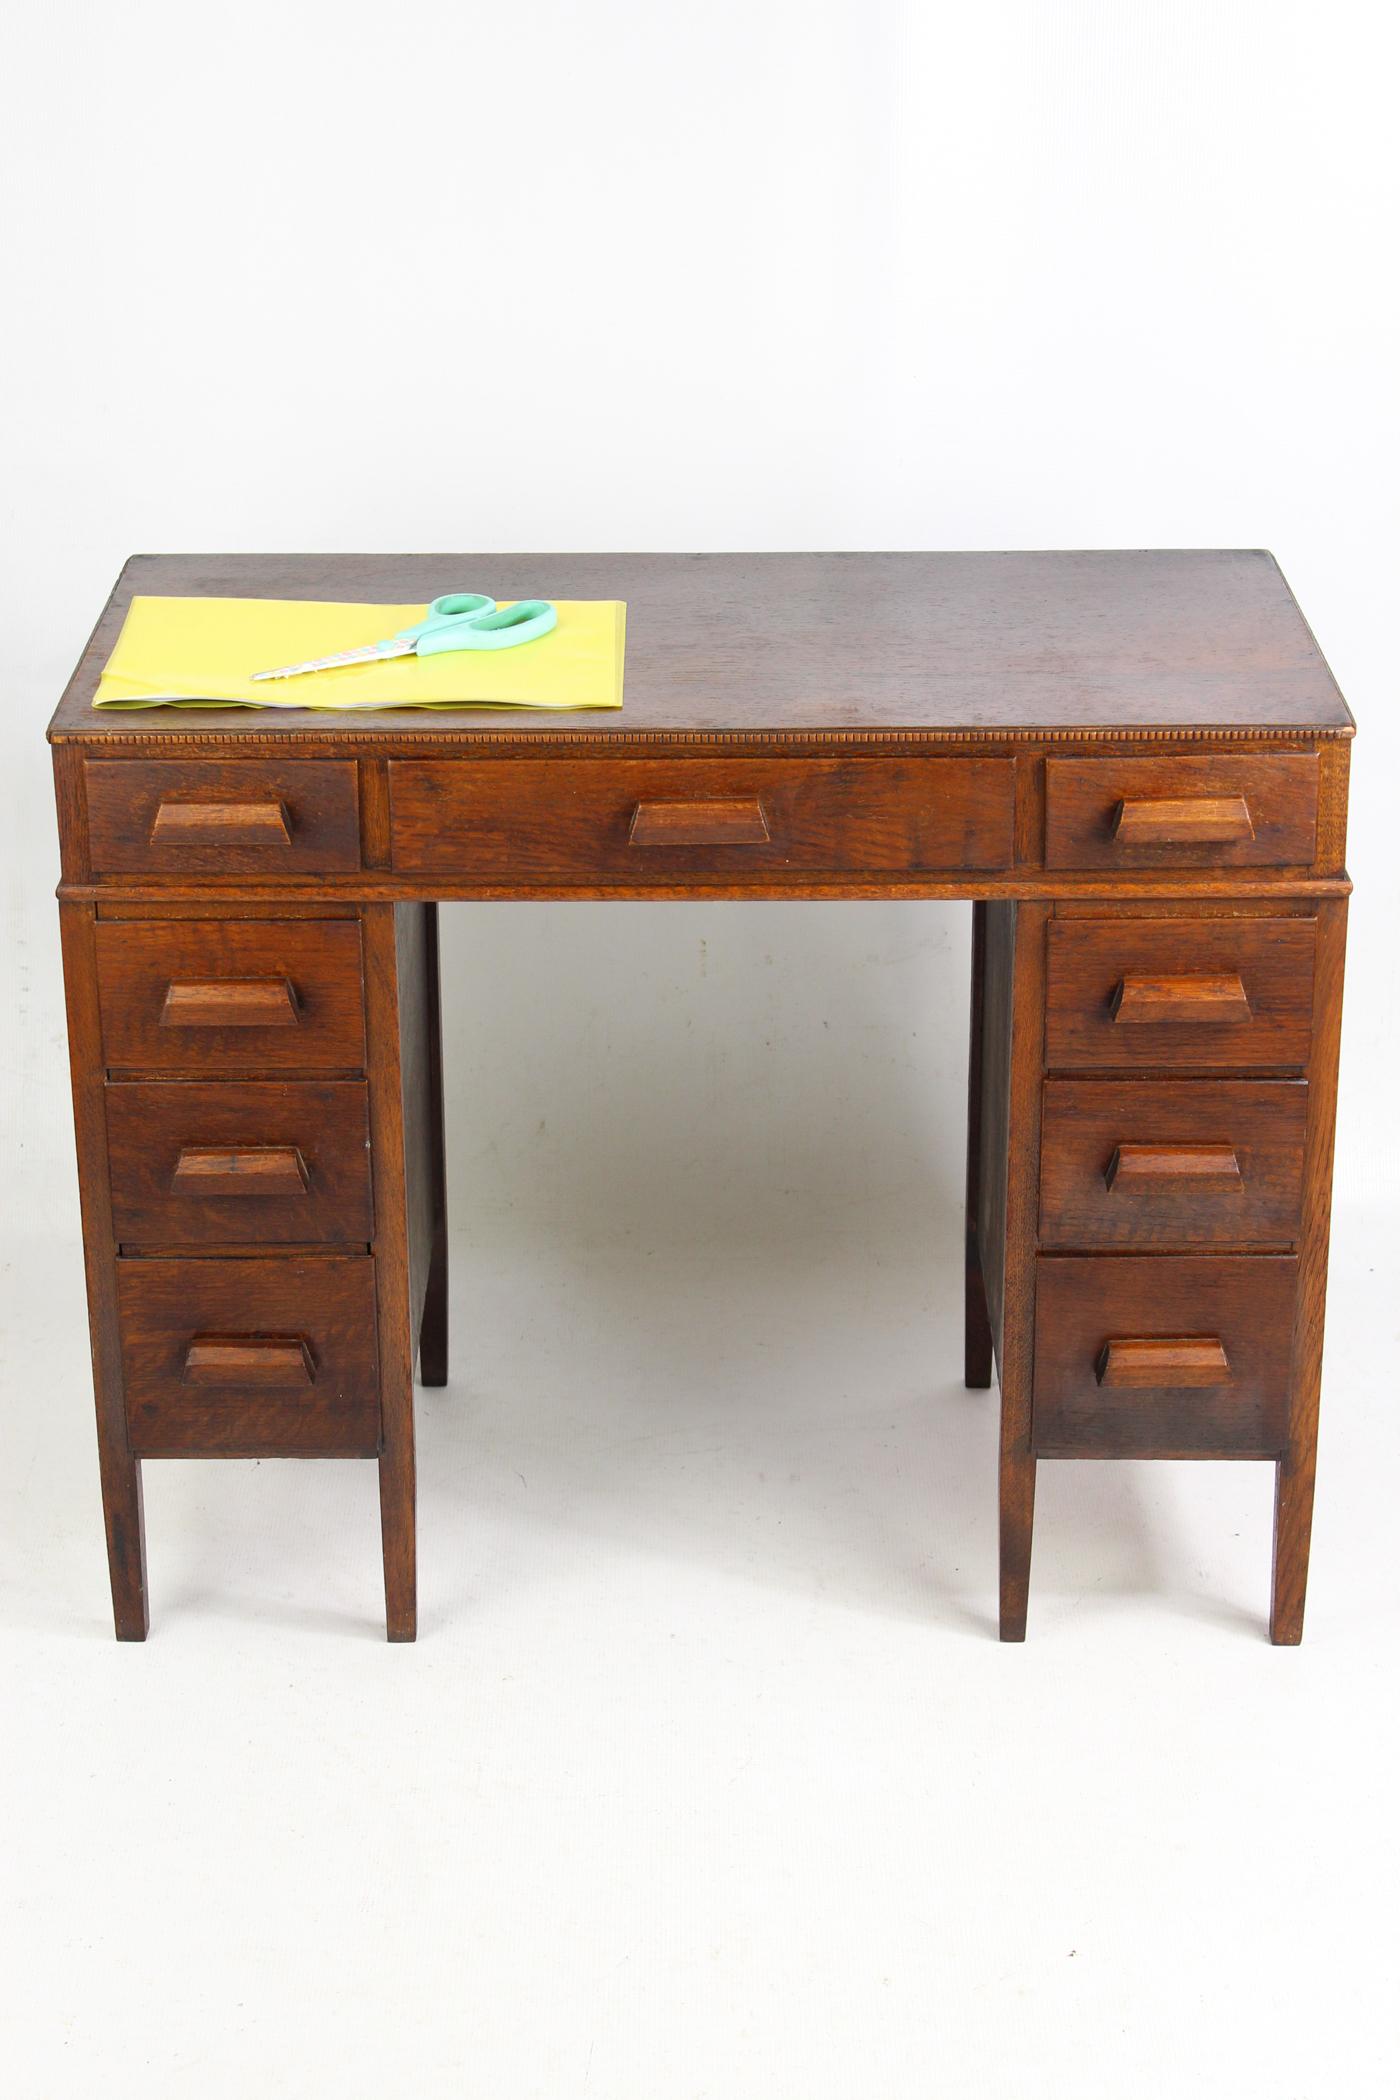 A charming and unusual vintage English art deco childs oak desk dating from circa 1930s. With a central drawer flanked by a bank of 4 graduated drawers, each fitted with a triangular handles. With panelled back and sides the top with beaded edging